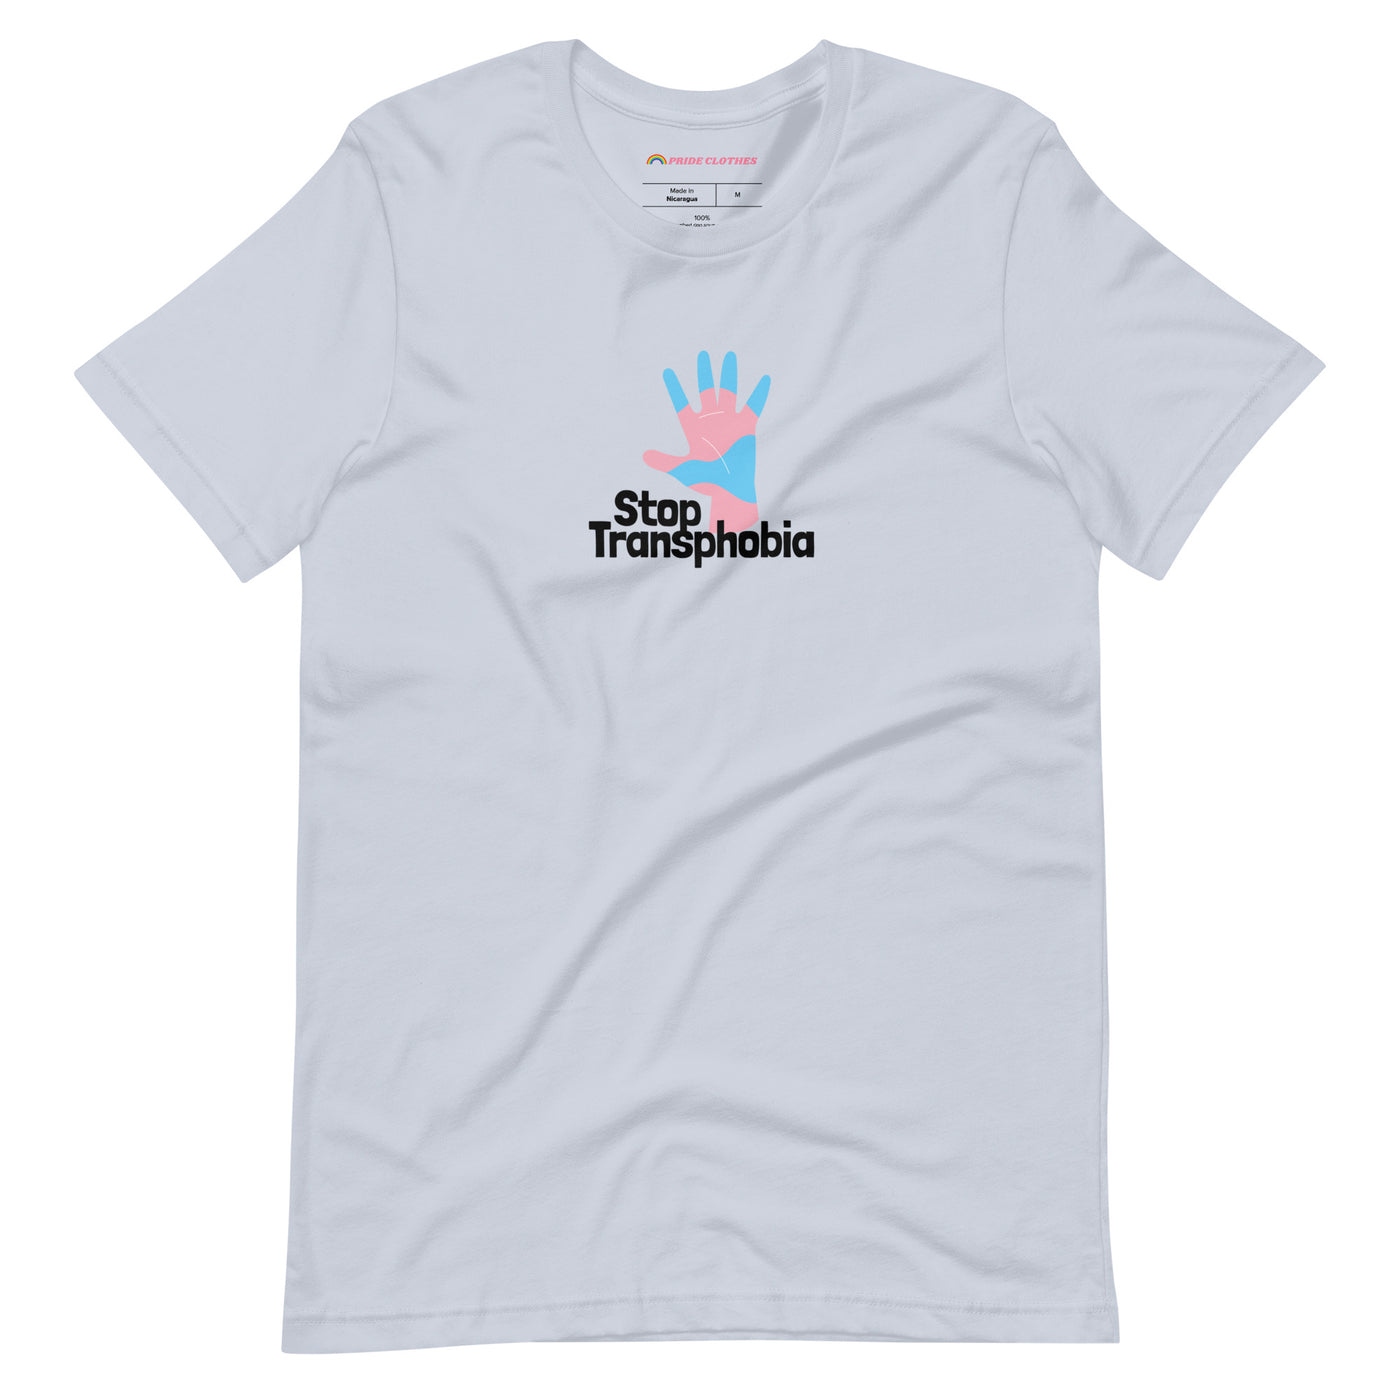 Pride Clothes - Take a Stand for Equality Stop Transphobia T-Shirt - Light Blue